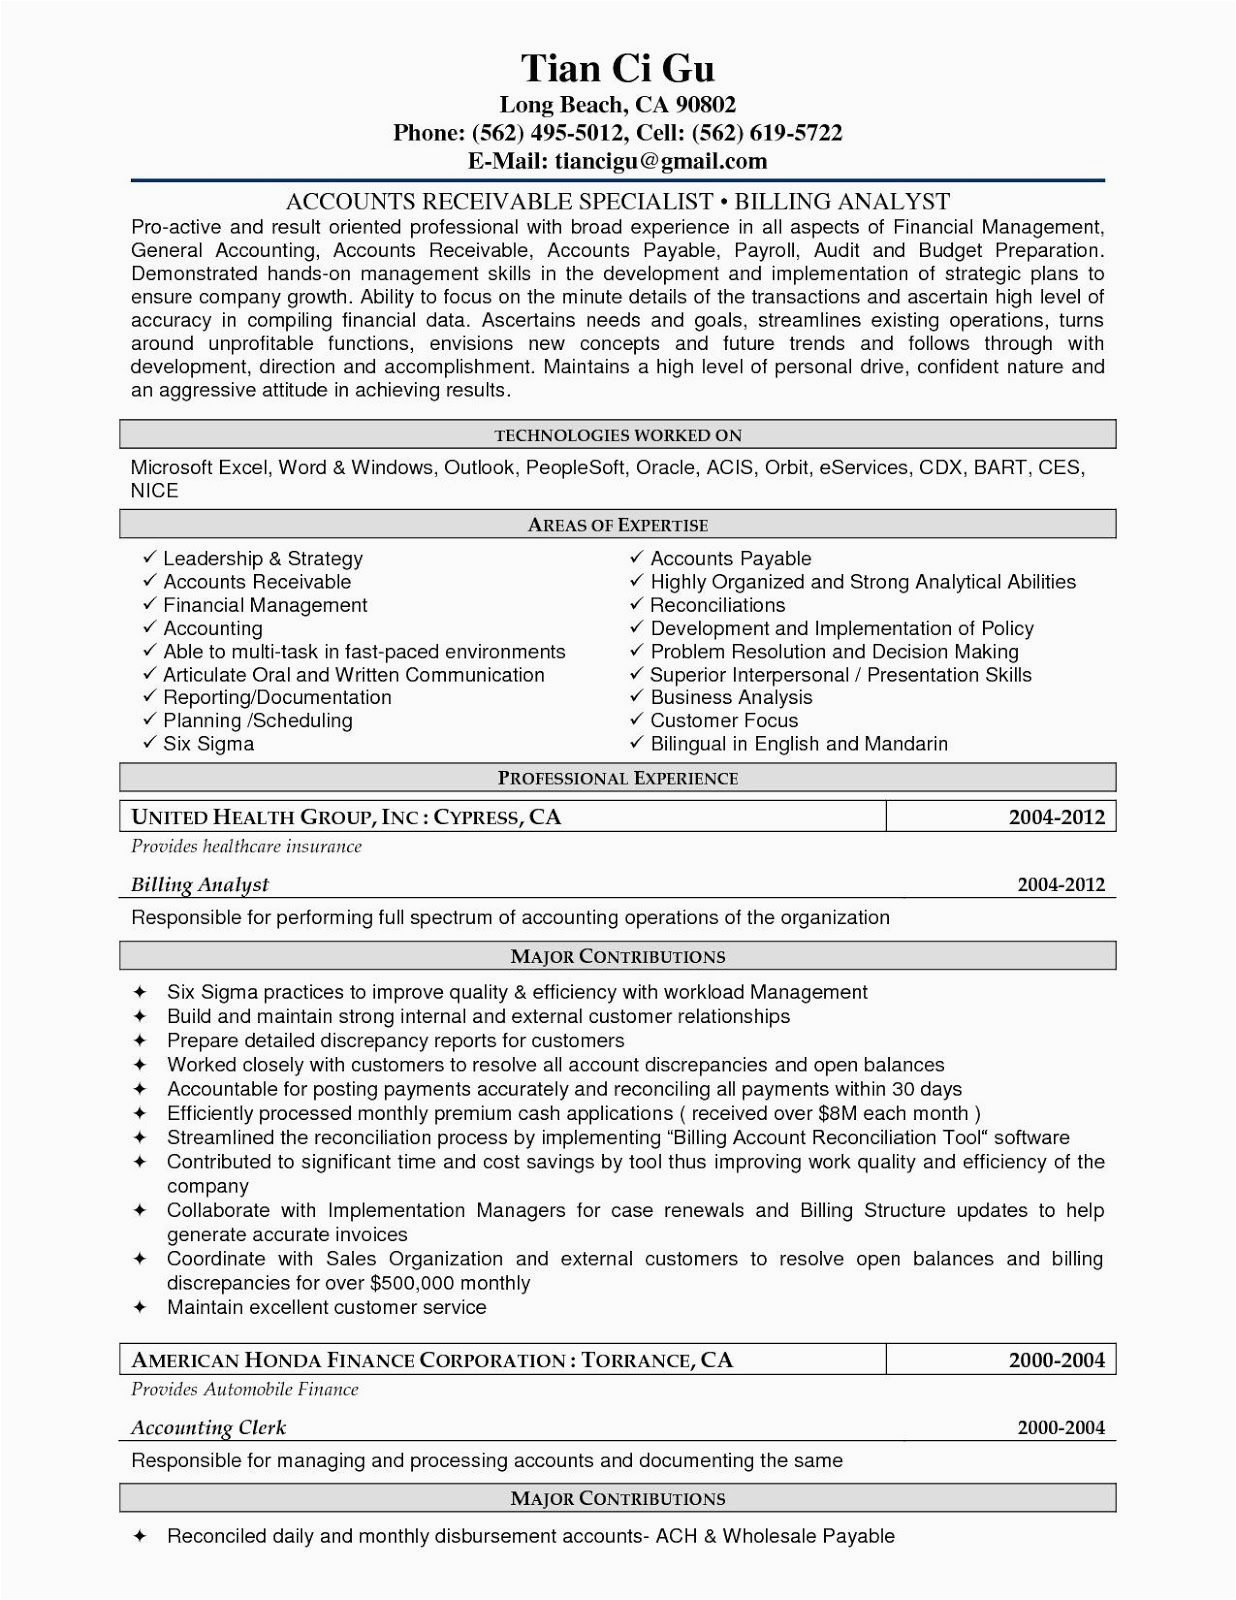 Accounts Payable Sample Resume In India Accounts Payable Resume format Accounts Payable Resume format In India